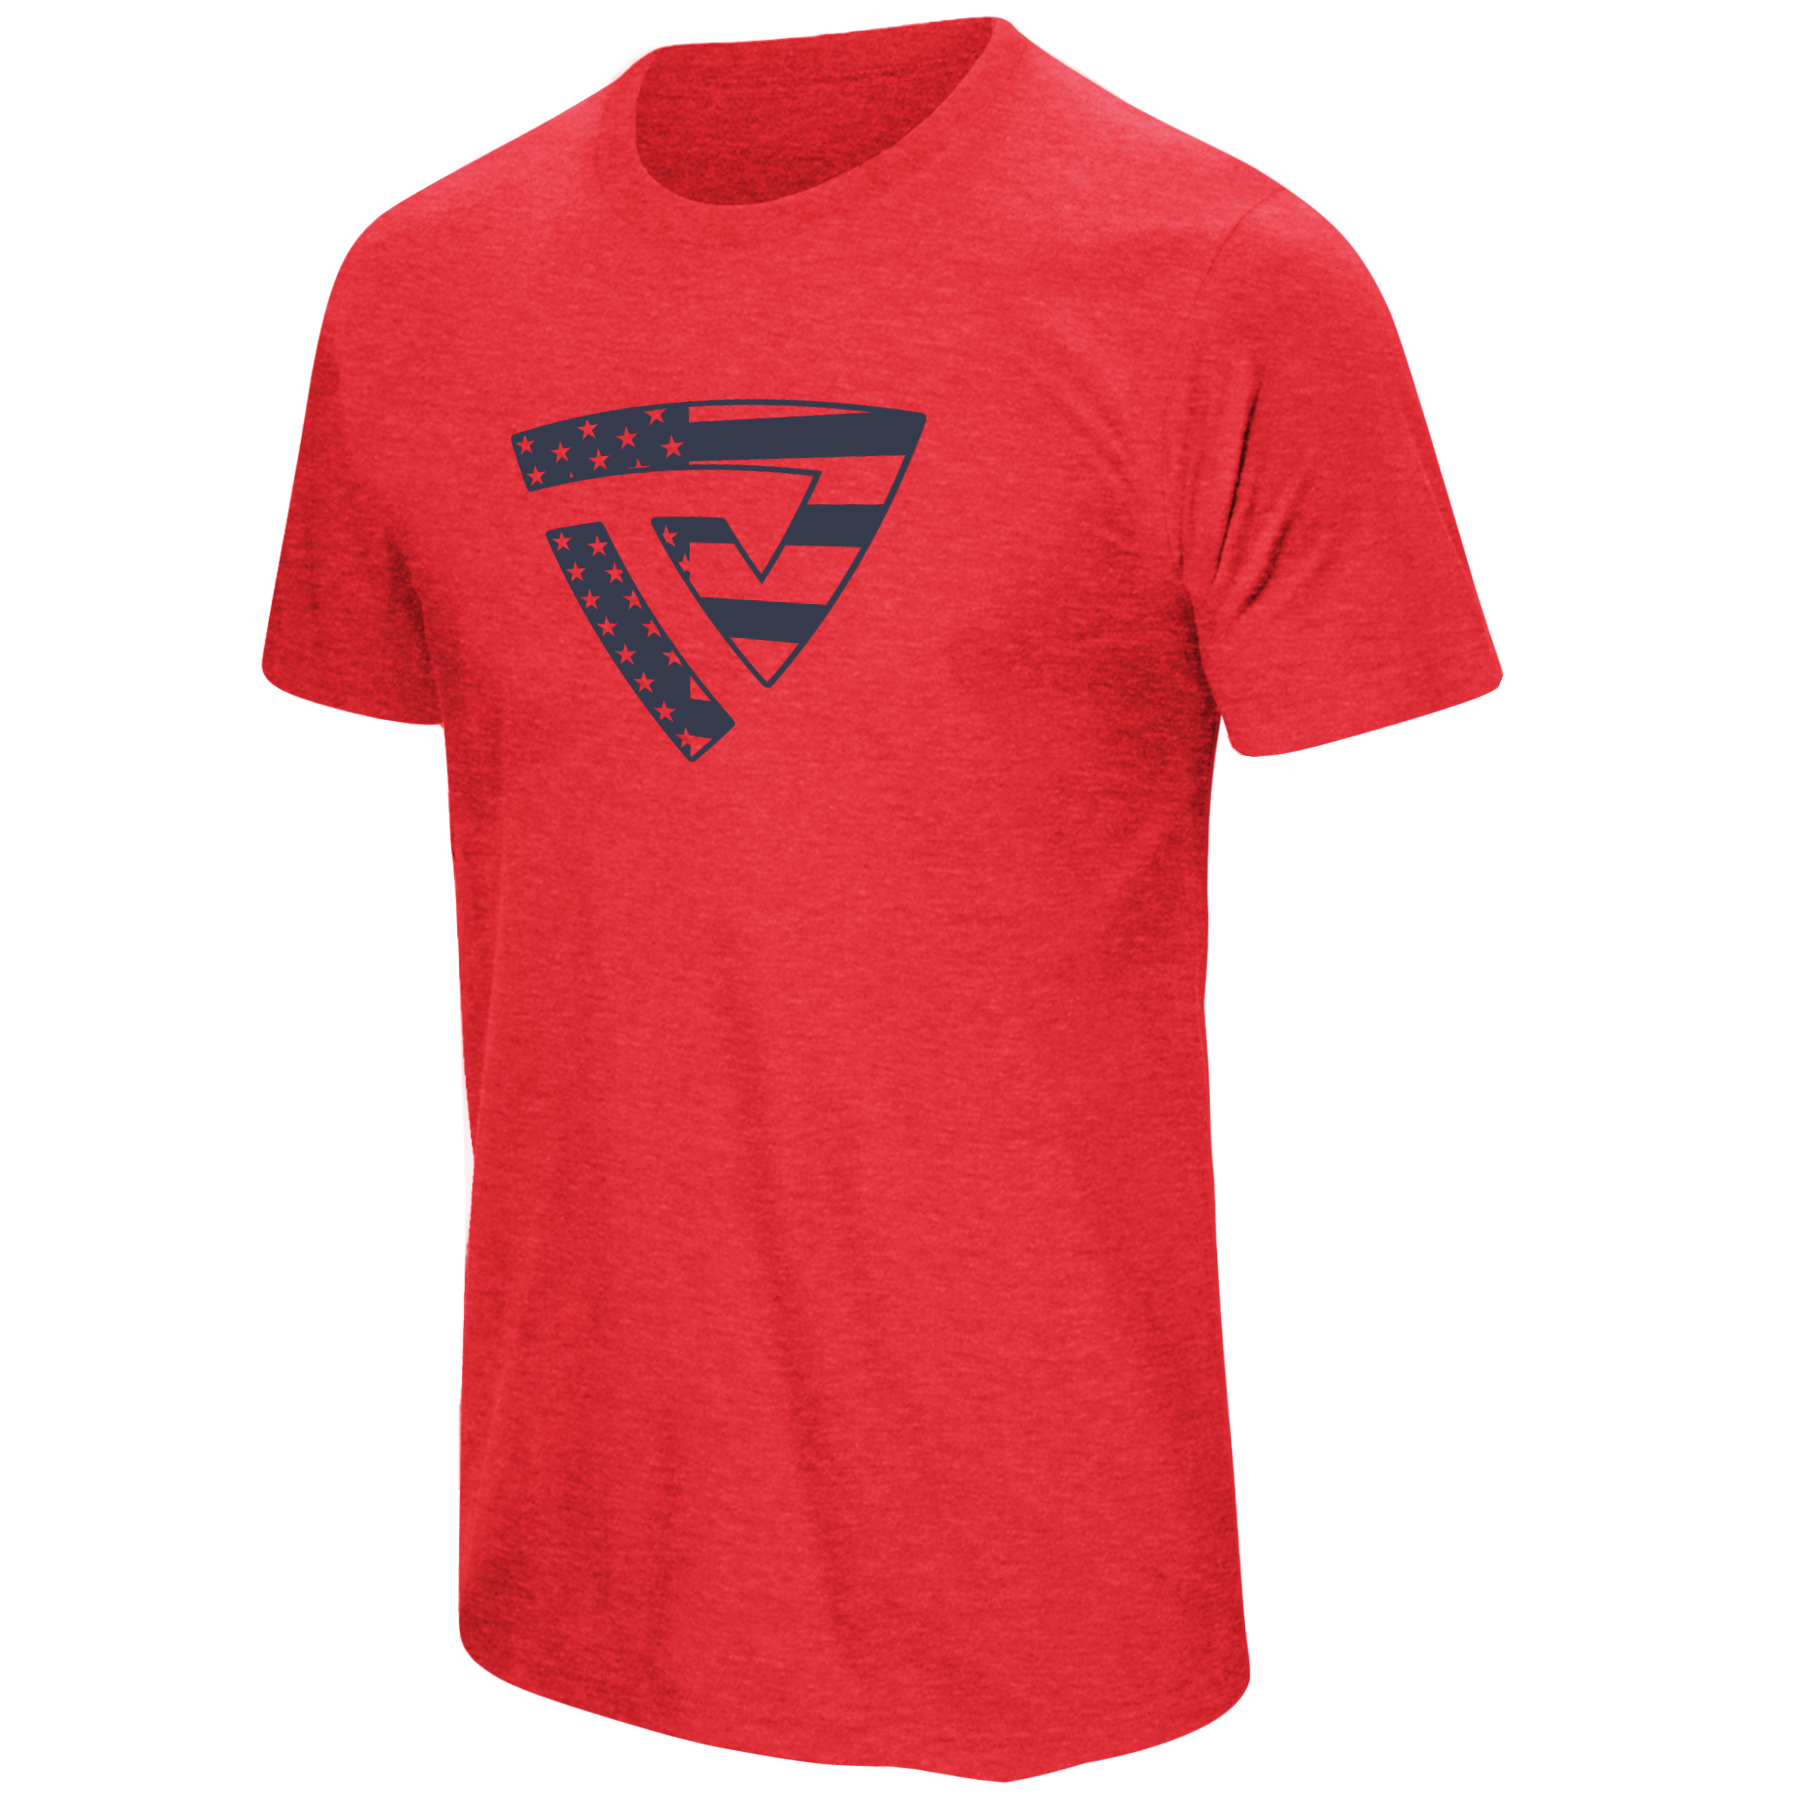 Men's Stars and Stripes Tee